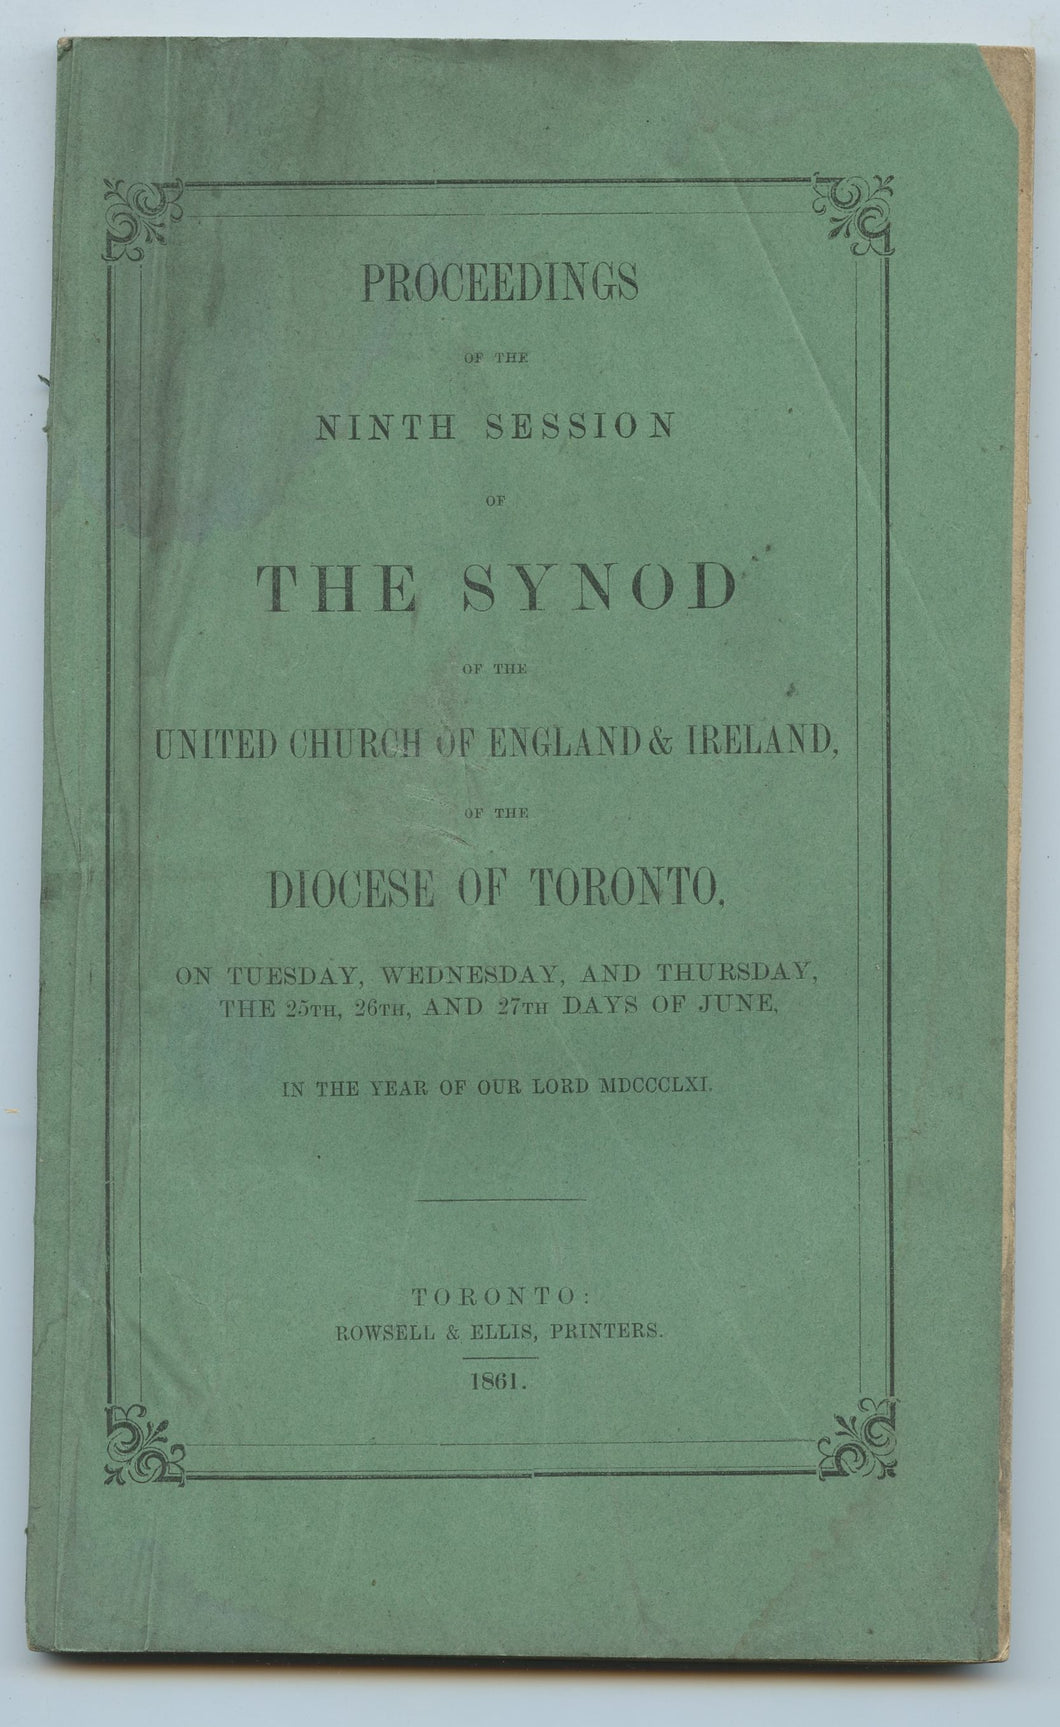 Proceedings of the Ninth Session of The Synod of the United Church of England & Ireland of the Diocese of Toronto, on Tuesday, Wednesday, and Thursday, the 25th, 26th, and 27th Days of June, in the Year of Our Lord MDCCCLXI